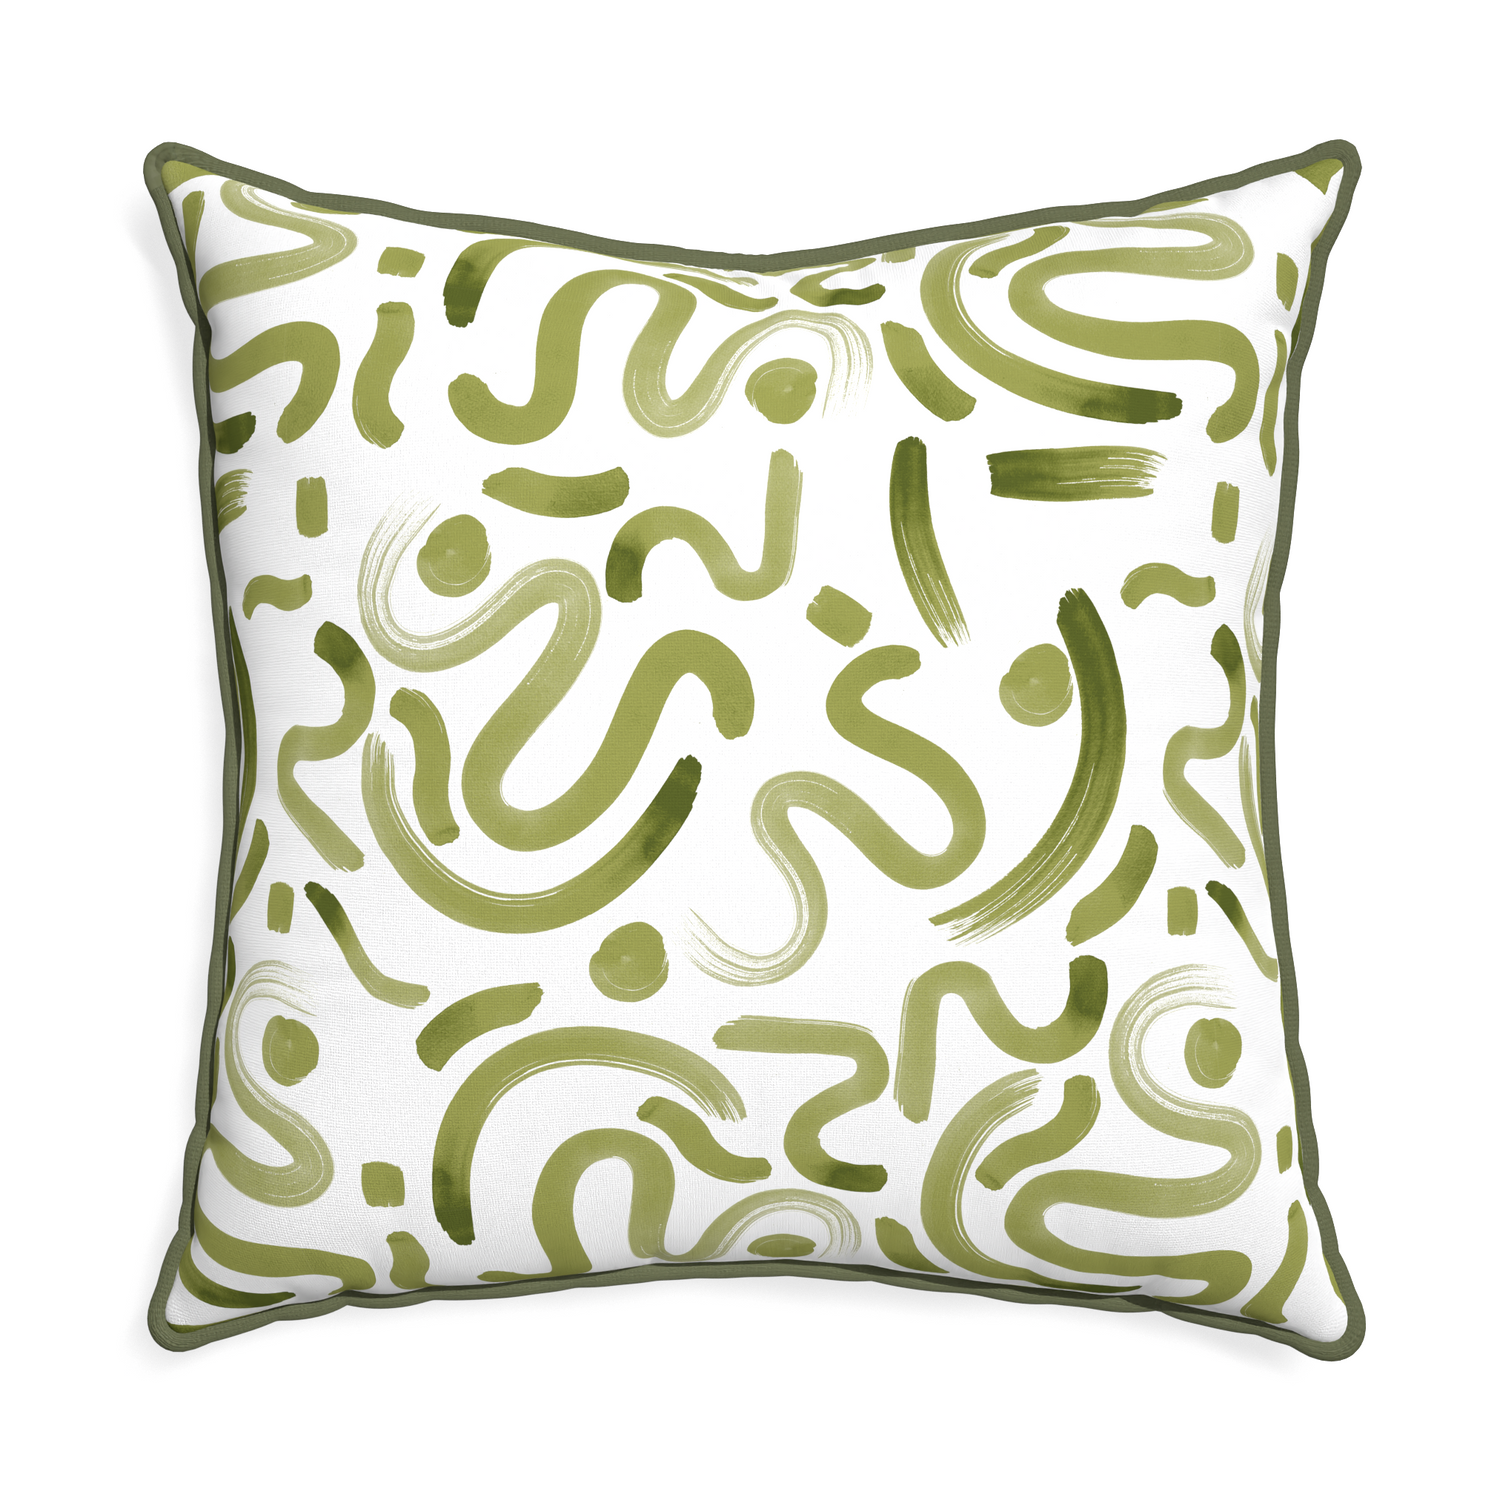 Euro-sham hockney moss custom pillow with f piping on white background